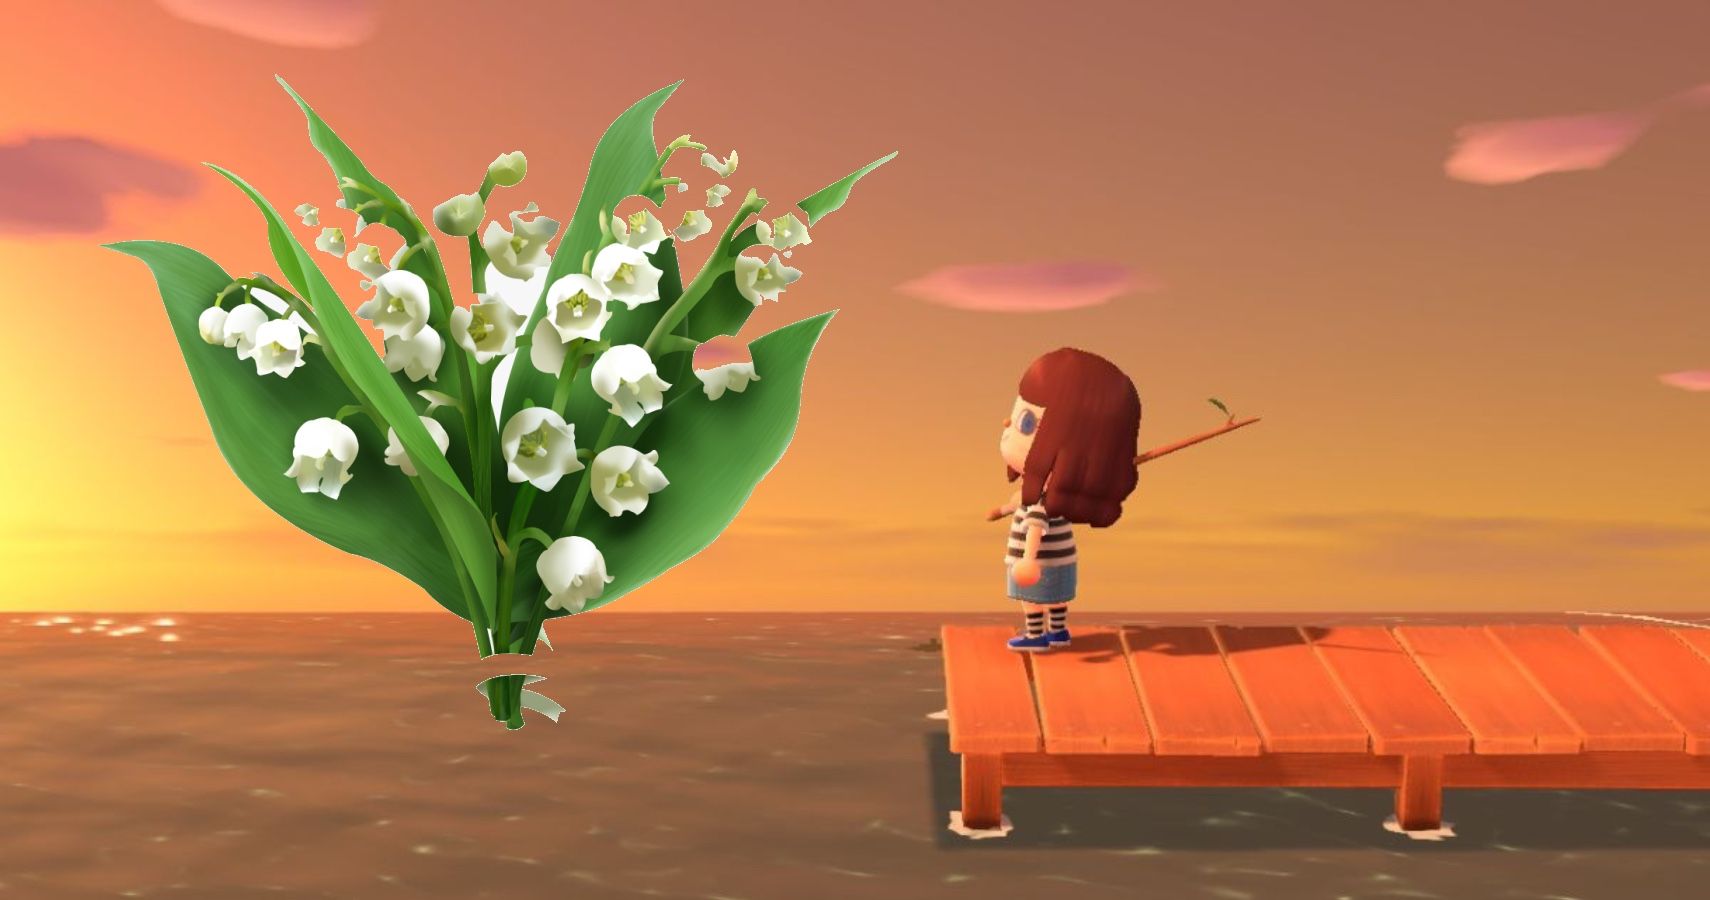 Animal Crossing New Horizons How To Get The Rare Lily Of The Valley Flower